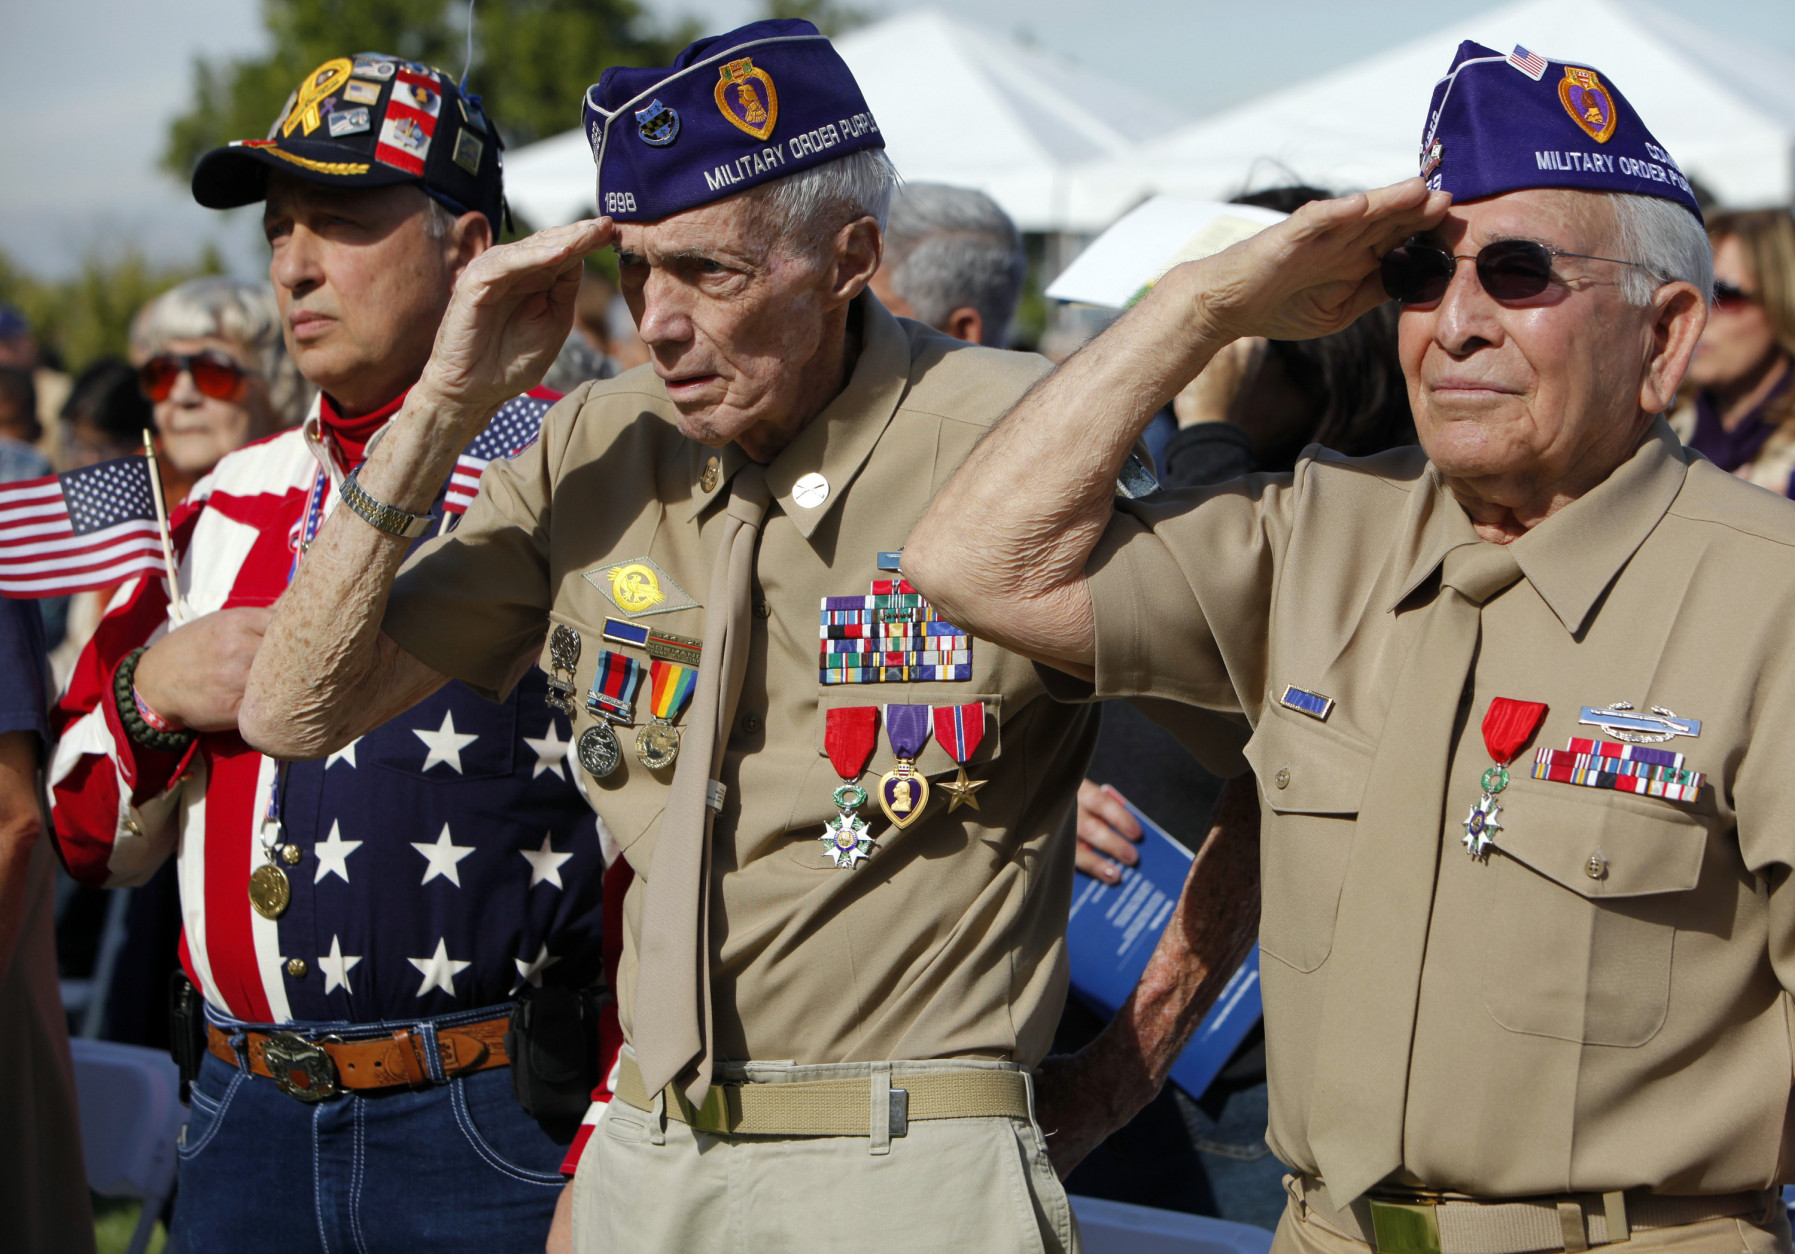 Peter Howenstein, middle, and Joe Govea, right, veterans of World War II and members of the military Order of the Purple Heart salute during Veterans Day ceremonies at Forest Lawn Hollywood Hills Memorial Park in Los Angeles Friday, Nov. 11, 2011. At far left is Paul Boghossian with Operation Gratitude. (AP Photo/Damian Dovarganes)